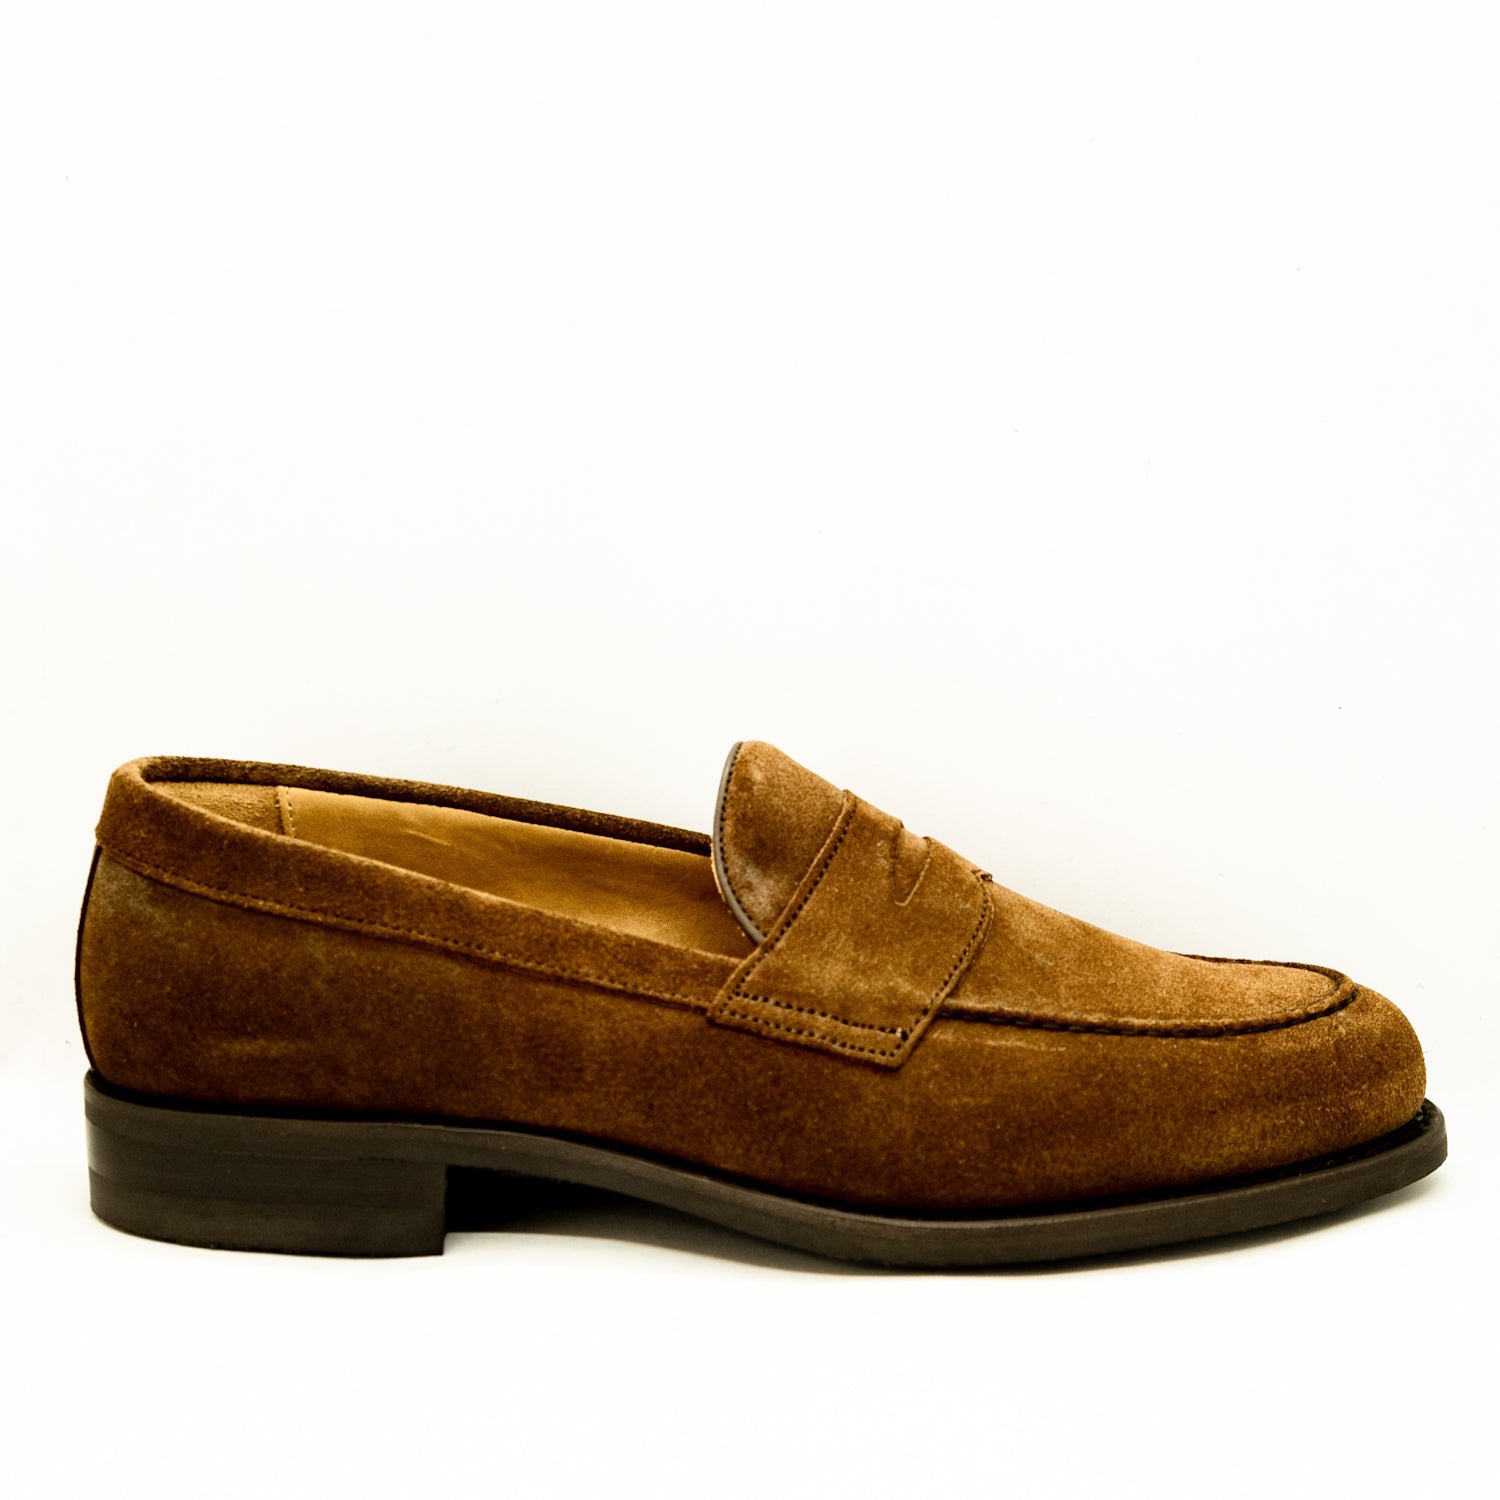 Berwick Penny Loafers Brown Suede